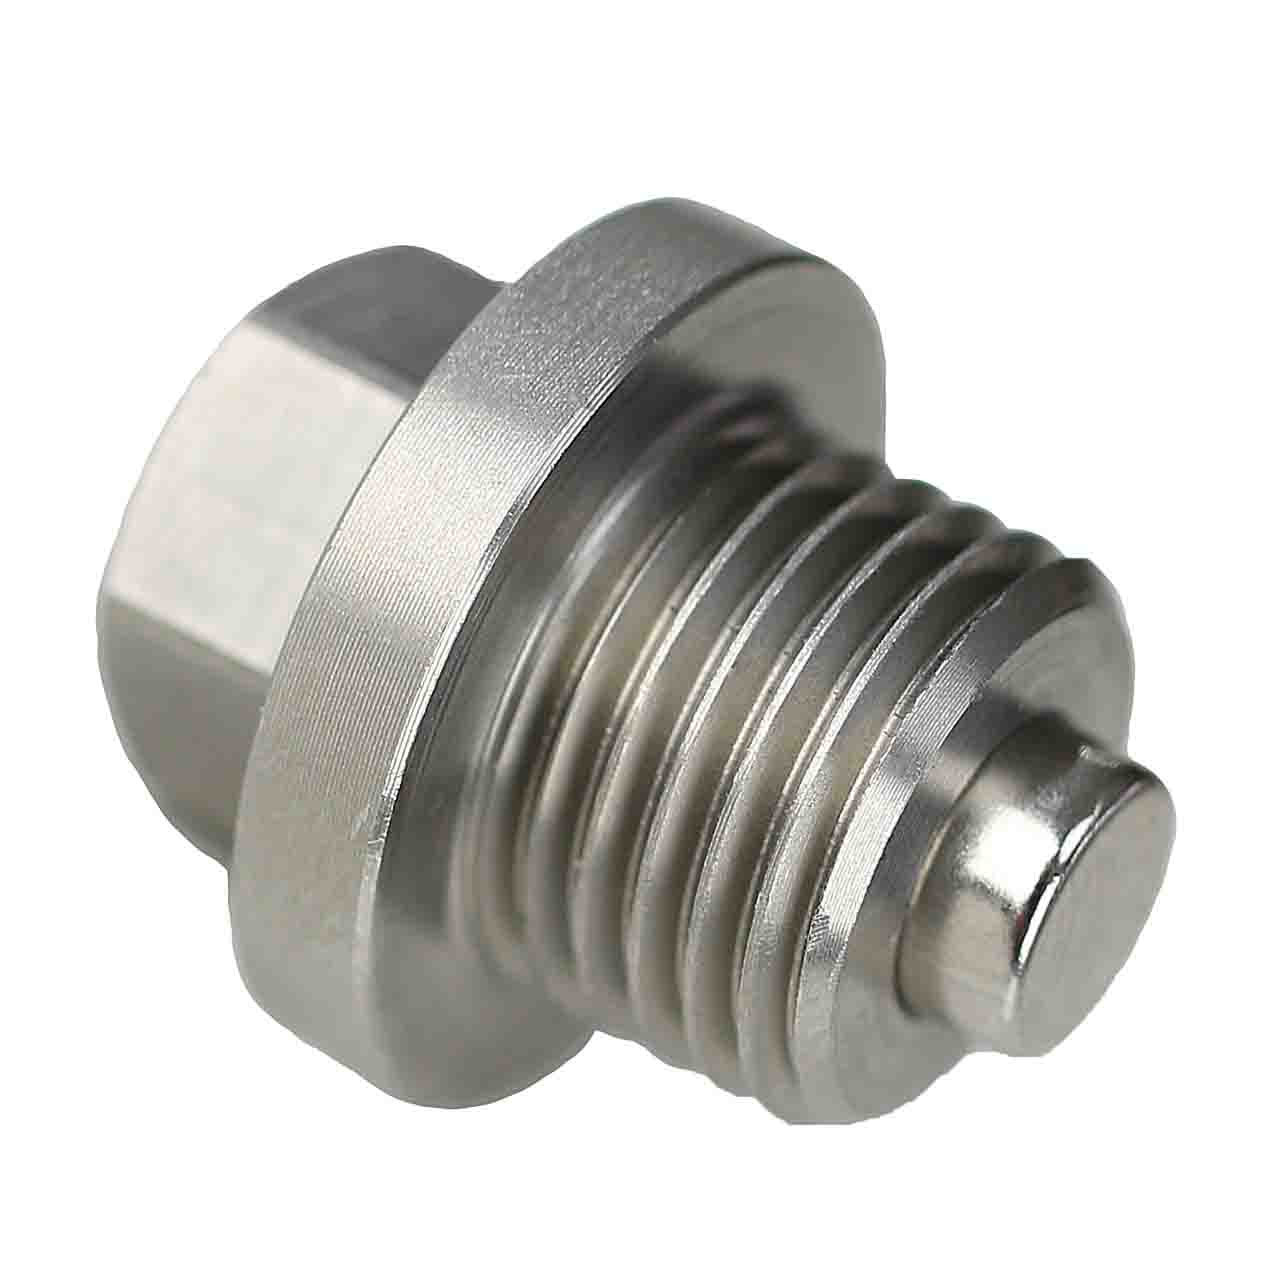 MG 1100 Magnetic Oil Drain Plug - 1962-1967 - 1.1 Liter - 4 Cylinder - Made In USA - Stainless Steel - Part Number 88G257